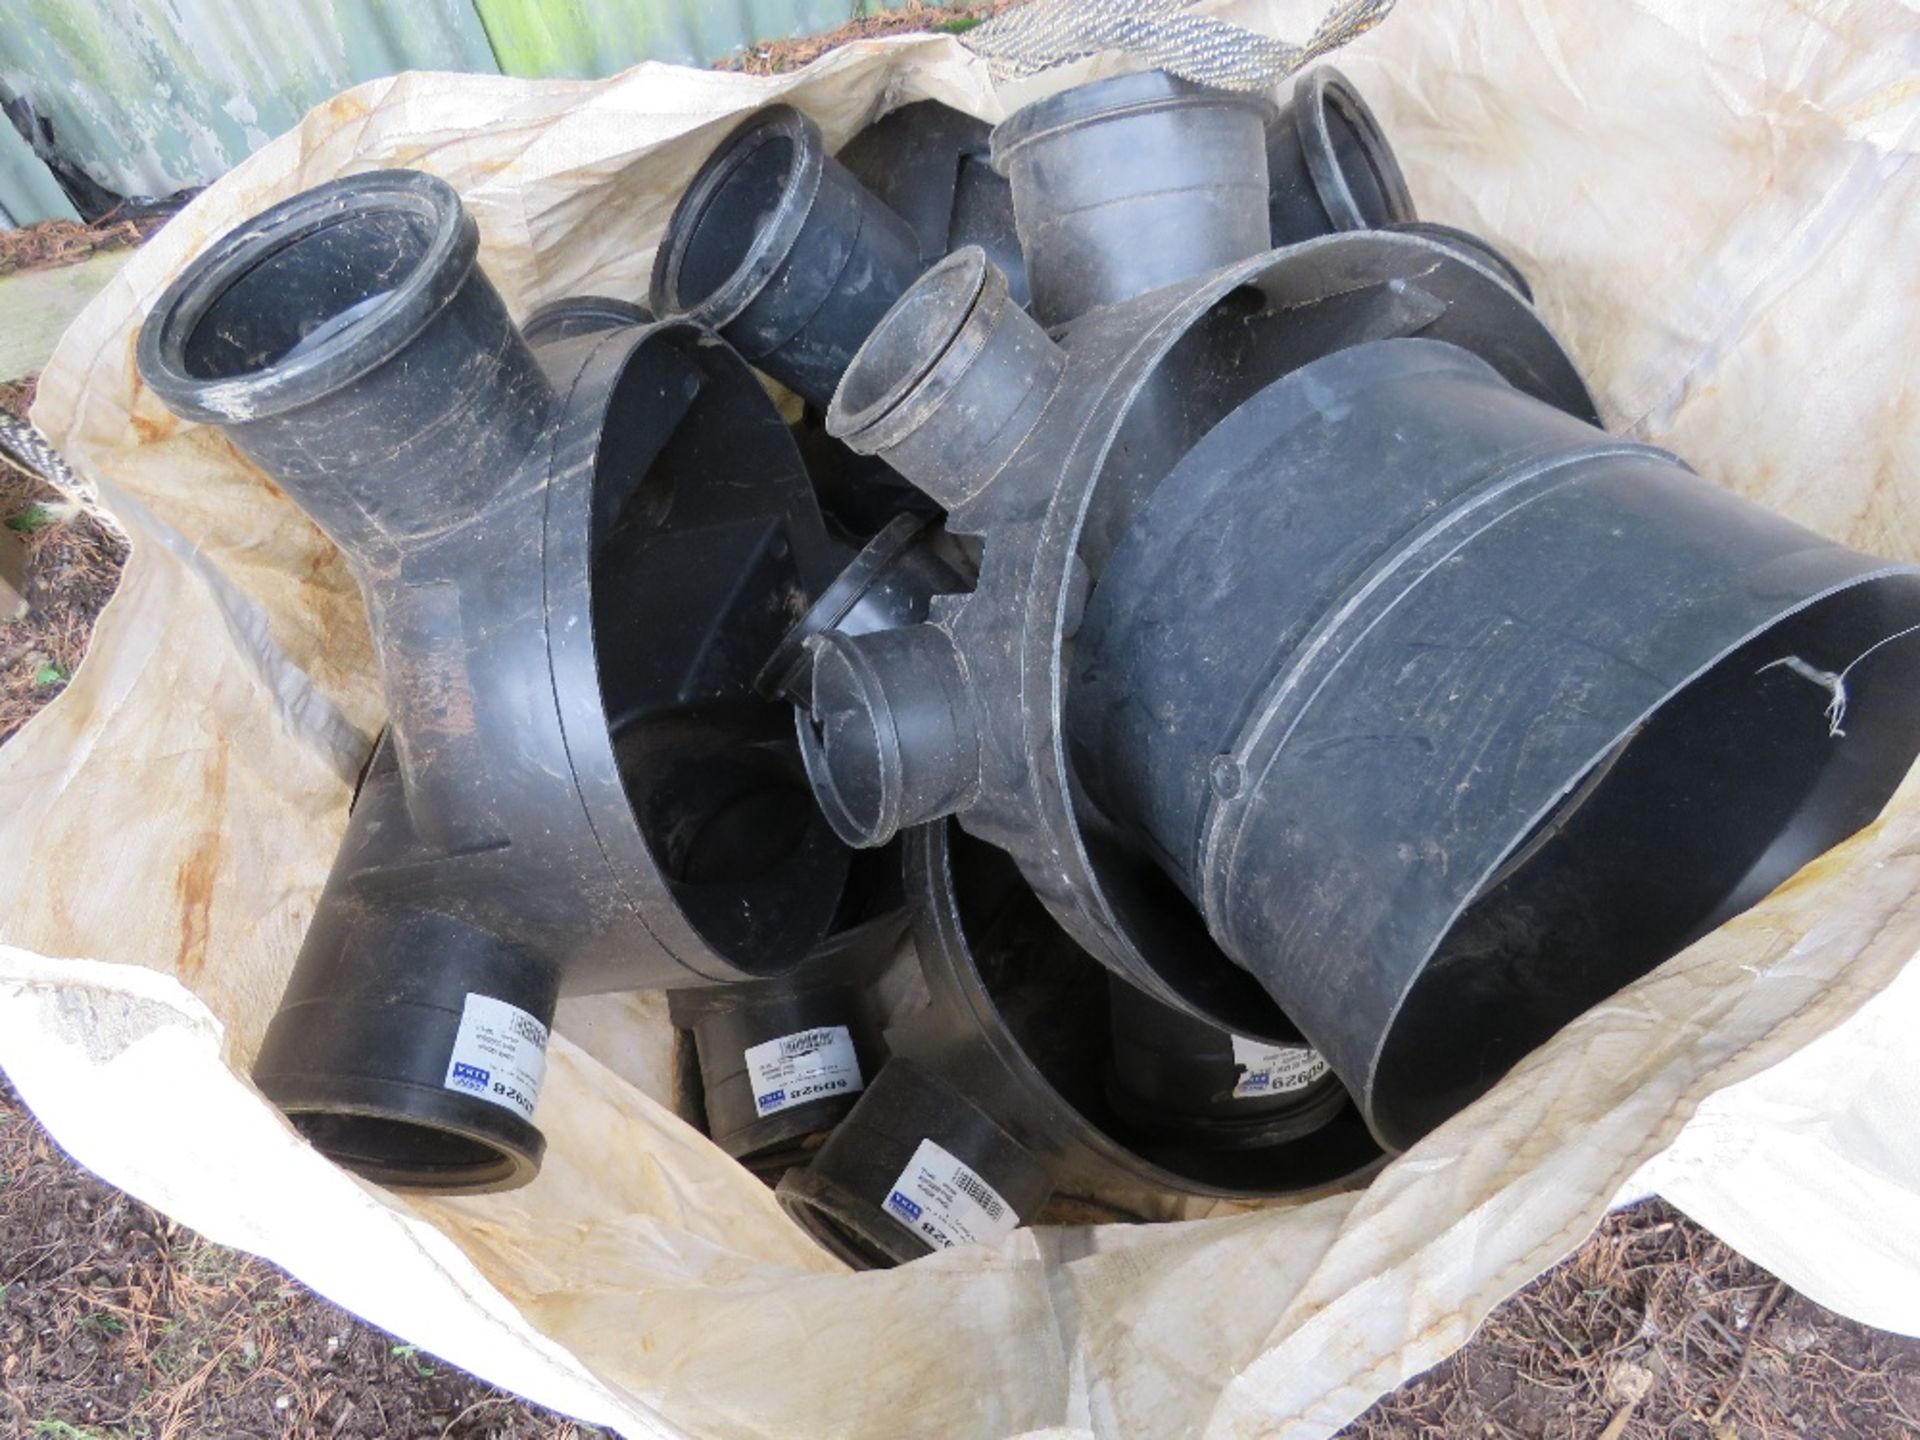 2 X BULK BAGS CONTAINING ASSORTED BLACK PLASTIC DRAINAGE AND MANHOLE FITTINGS . DIRECT FROM COMPANY - Image 2 of 5